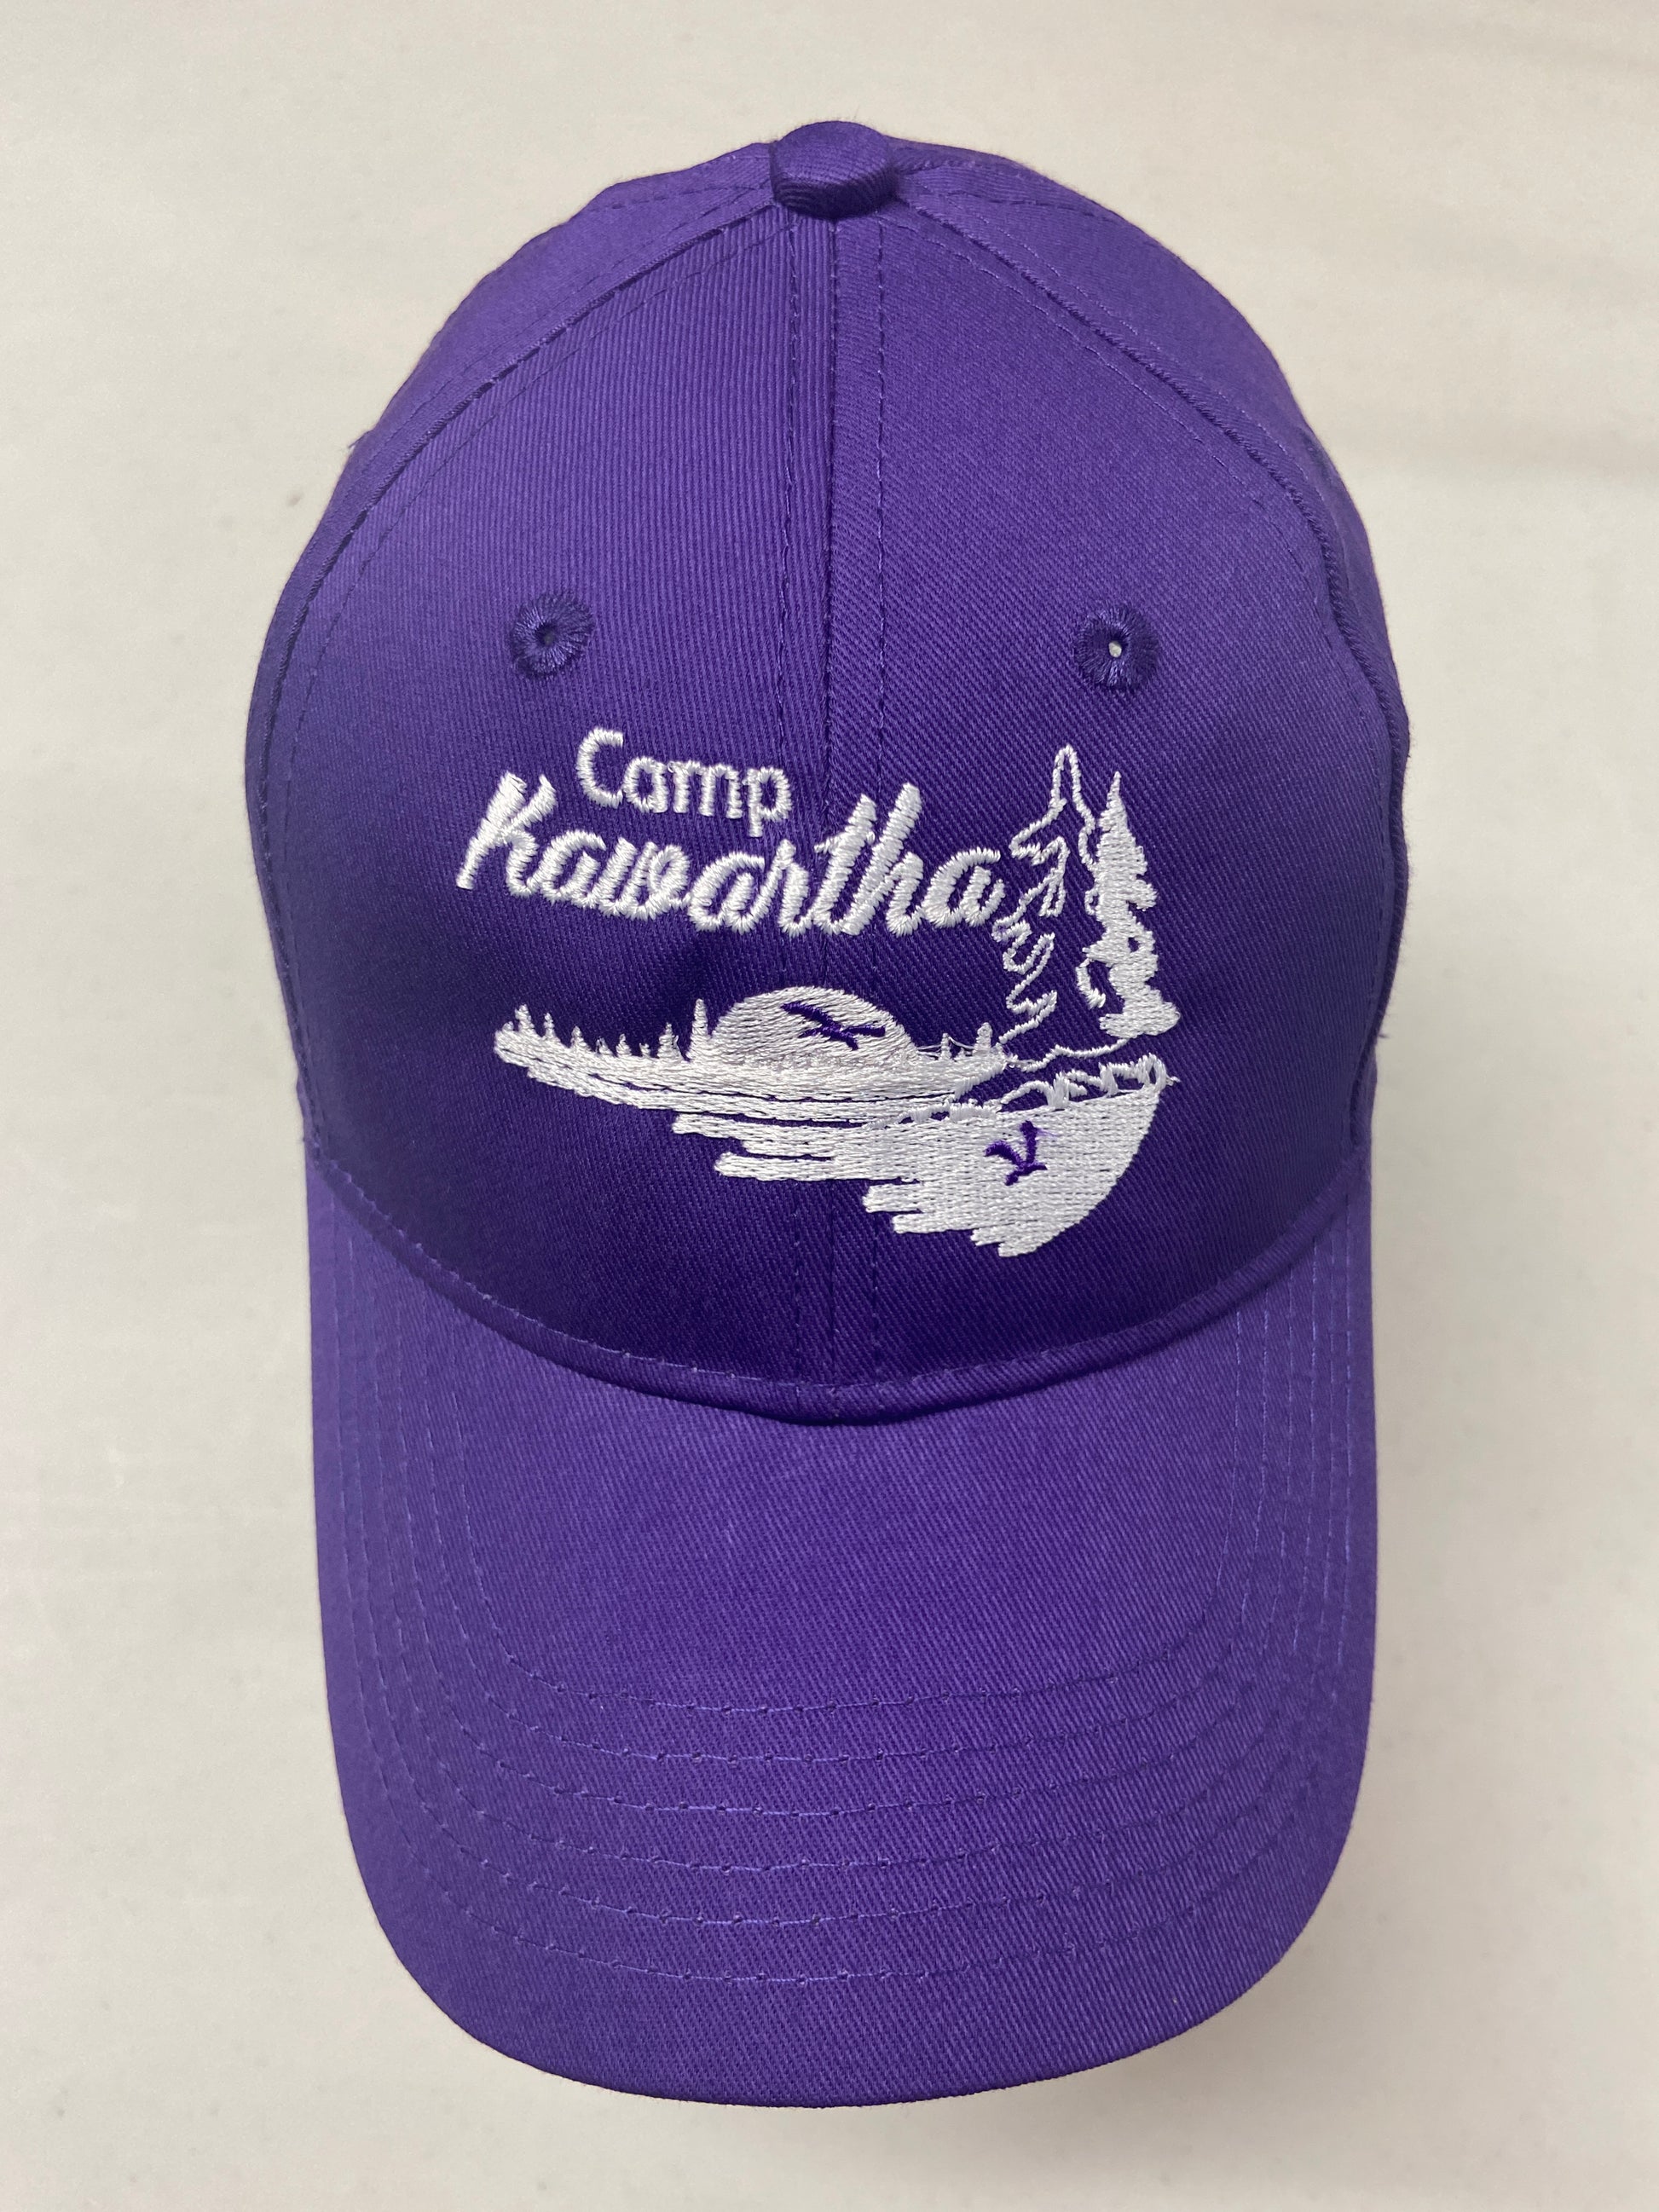 Youth-sized structured ball cap in purple.